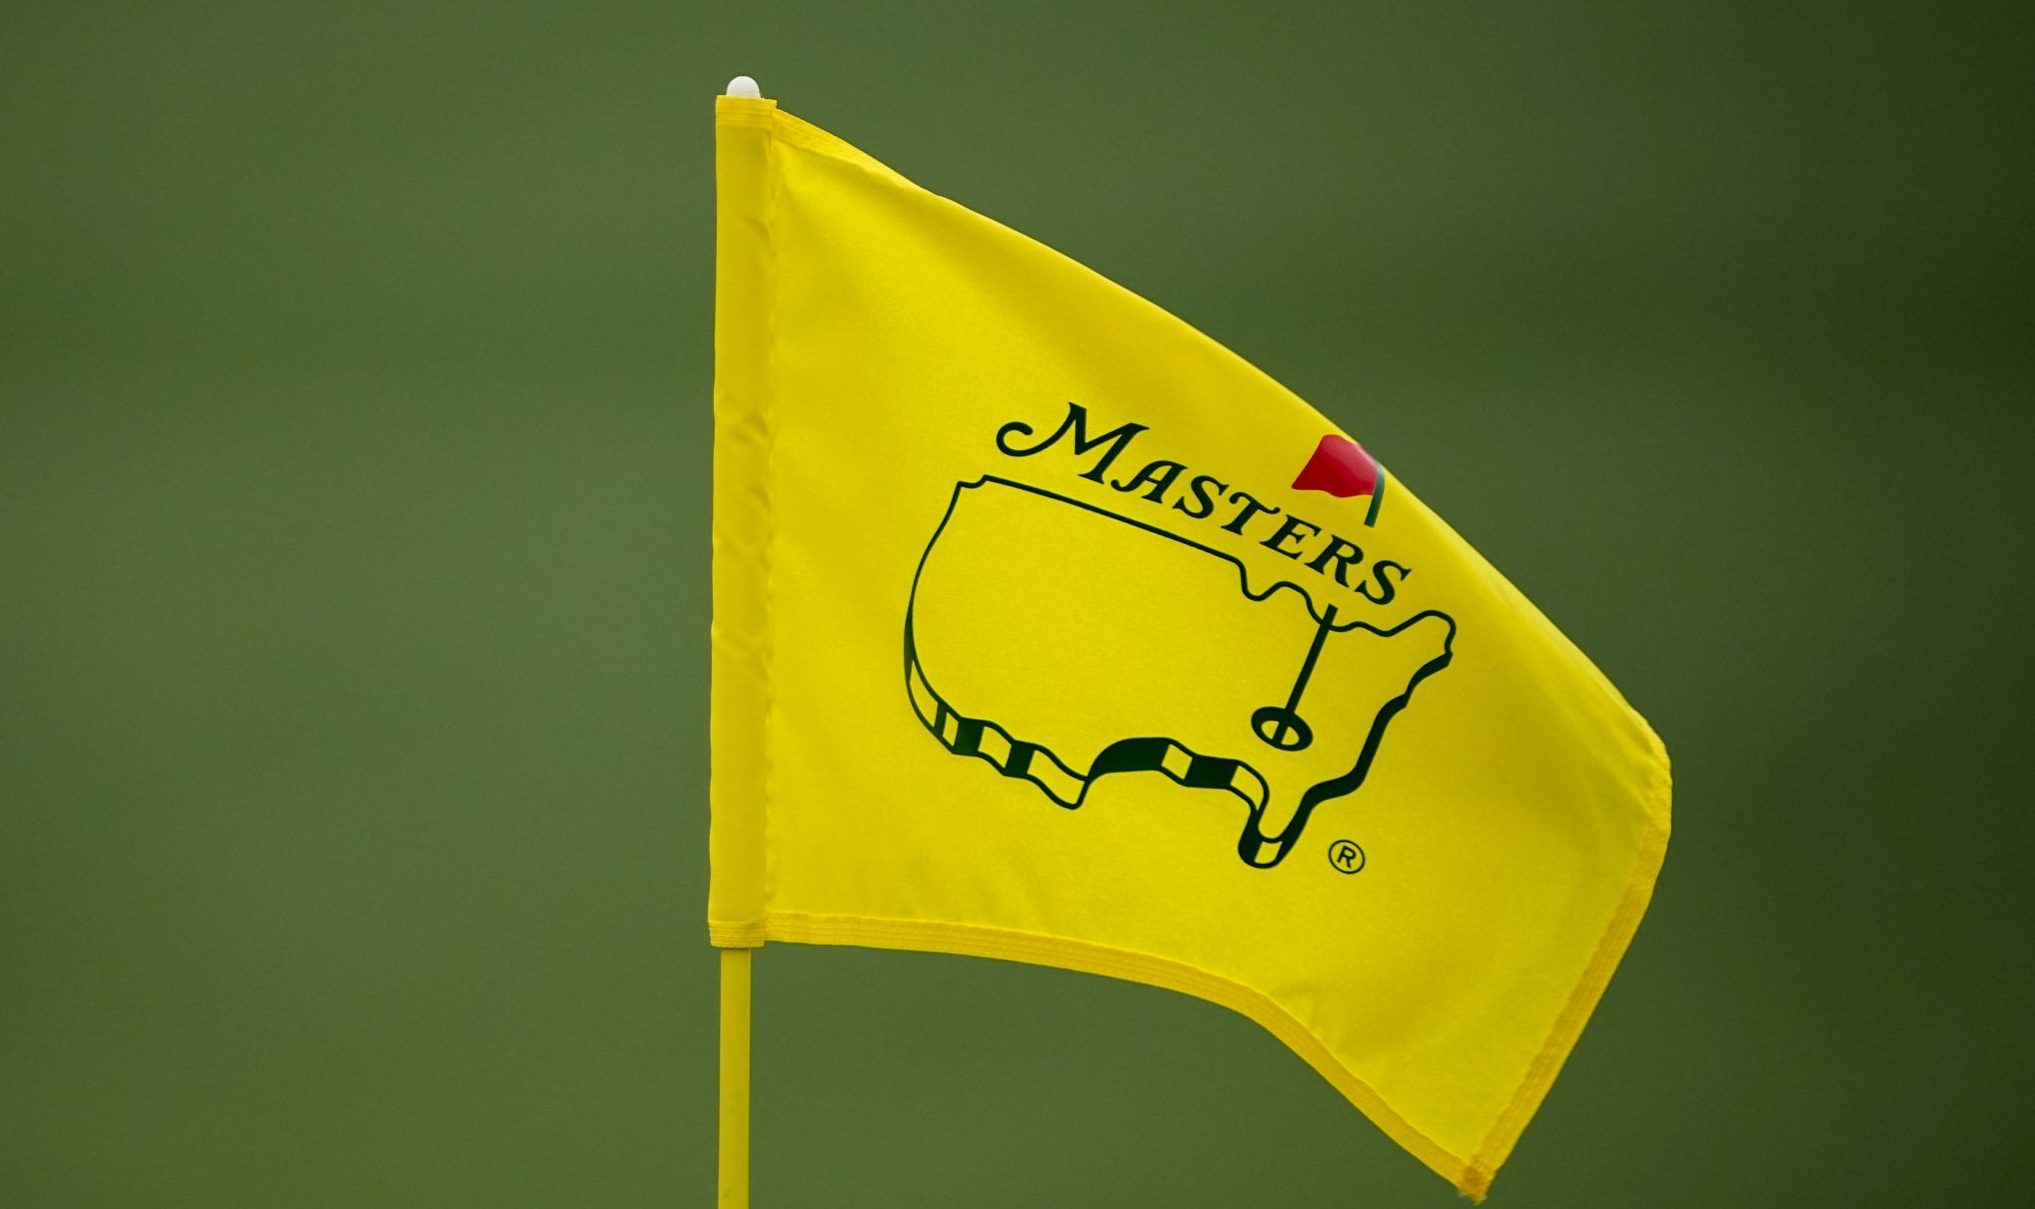 The Masters flag